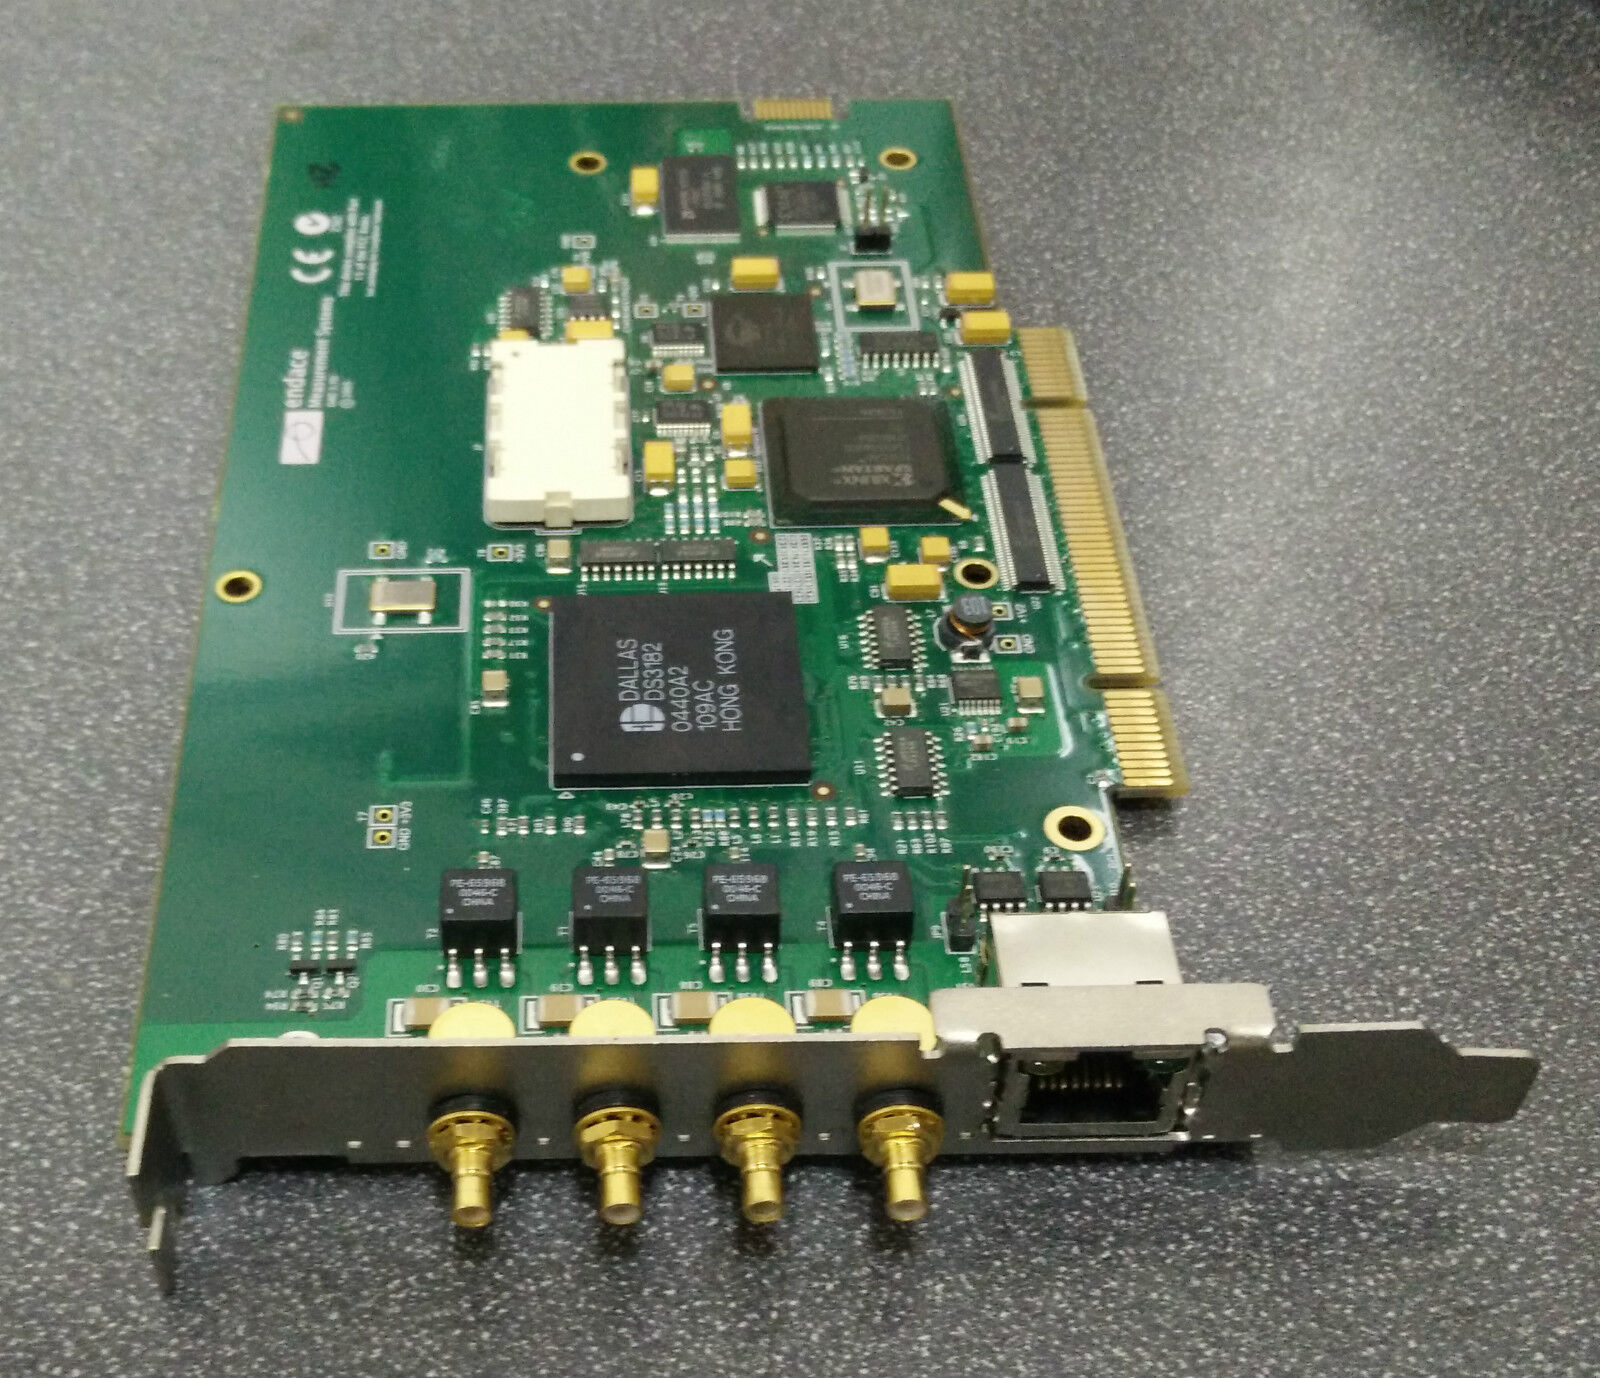 Endace DAG 3.7DS3 Network Monitoring Card